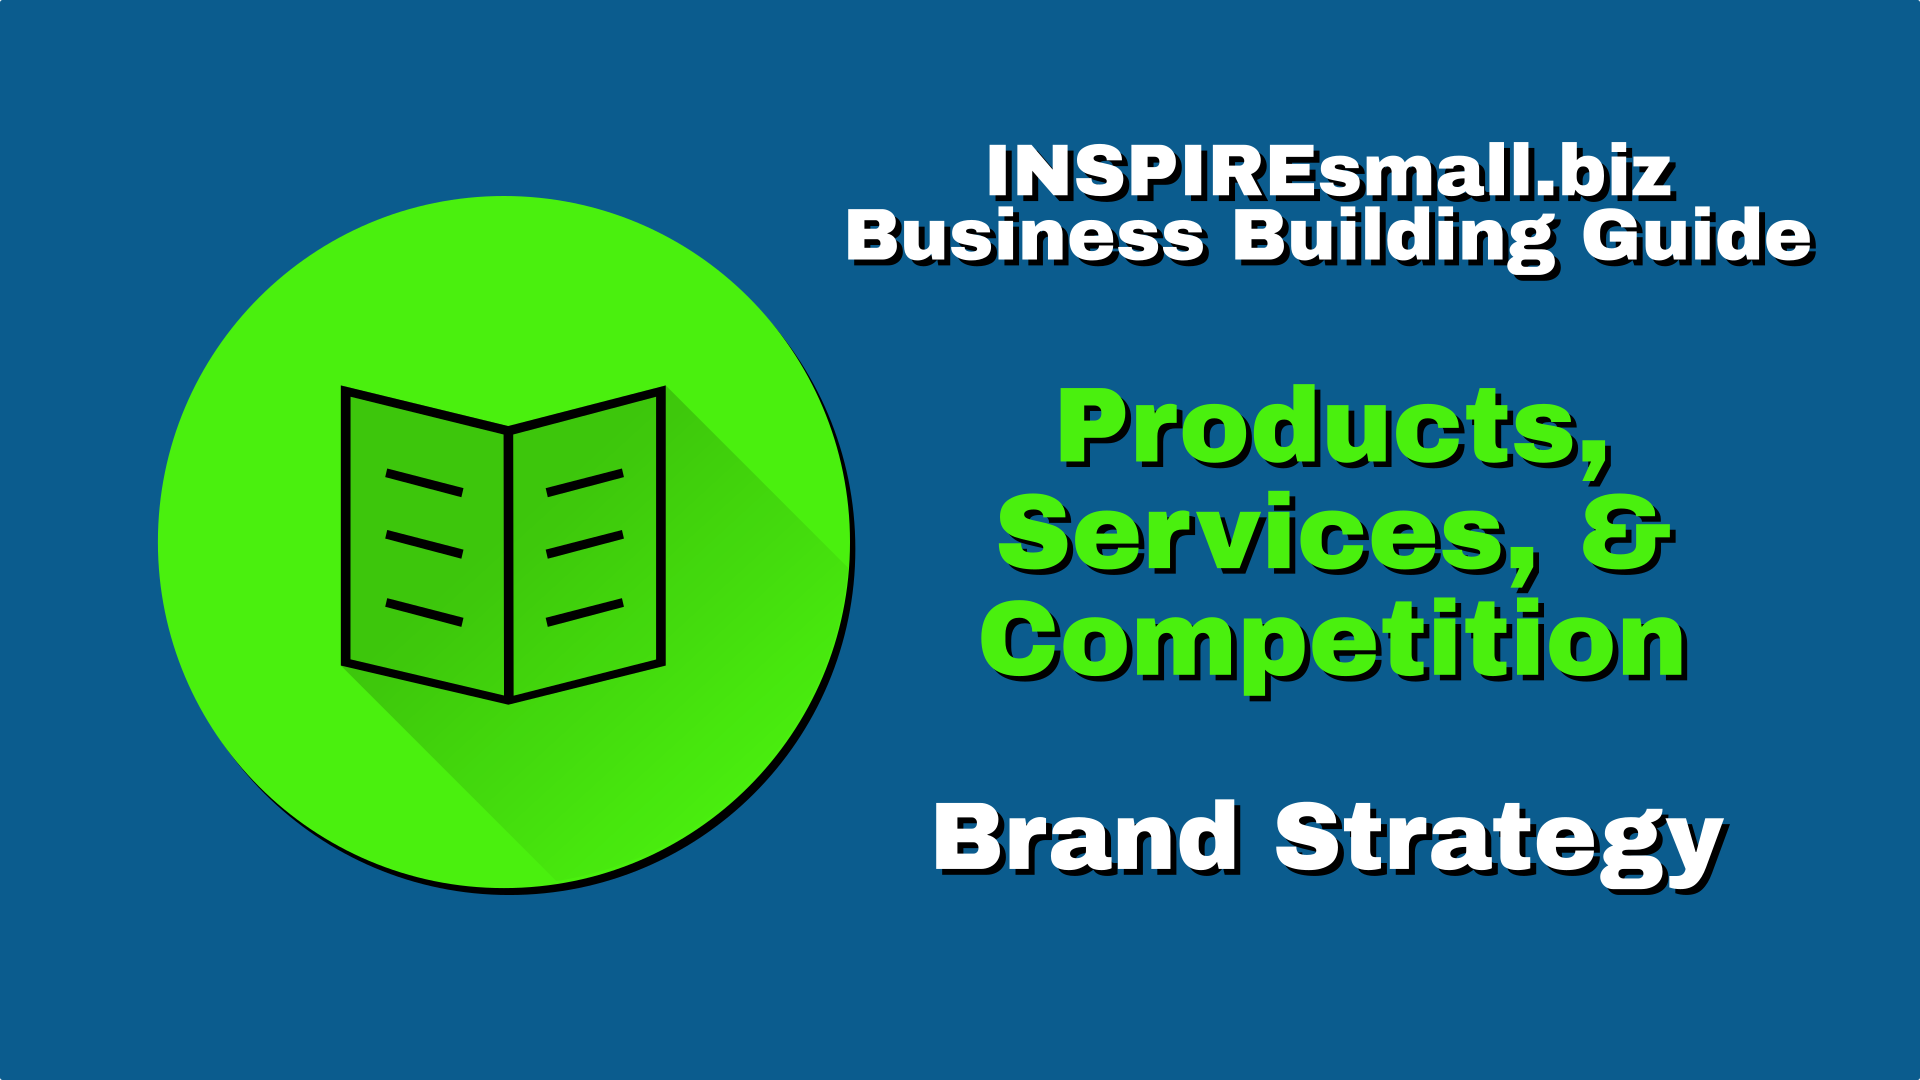 INSPIREsmall.biz Business Building Guide - Brand Strategy Section - Understanding Your Products, Services, & Competition